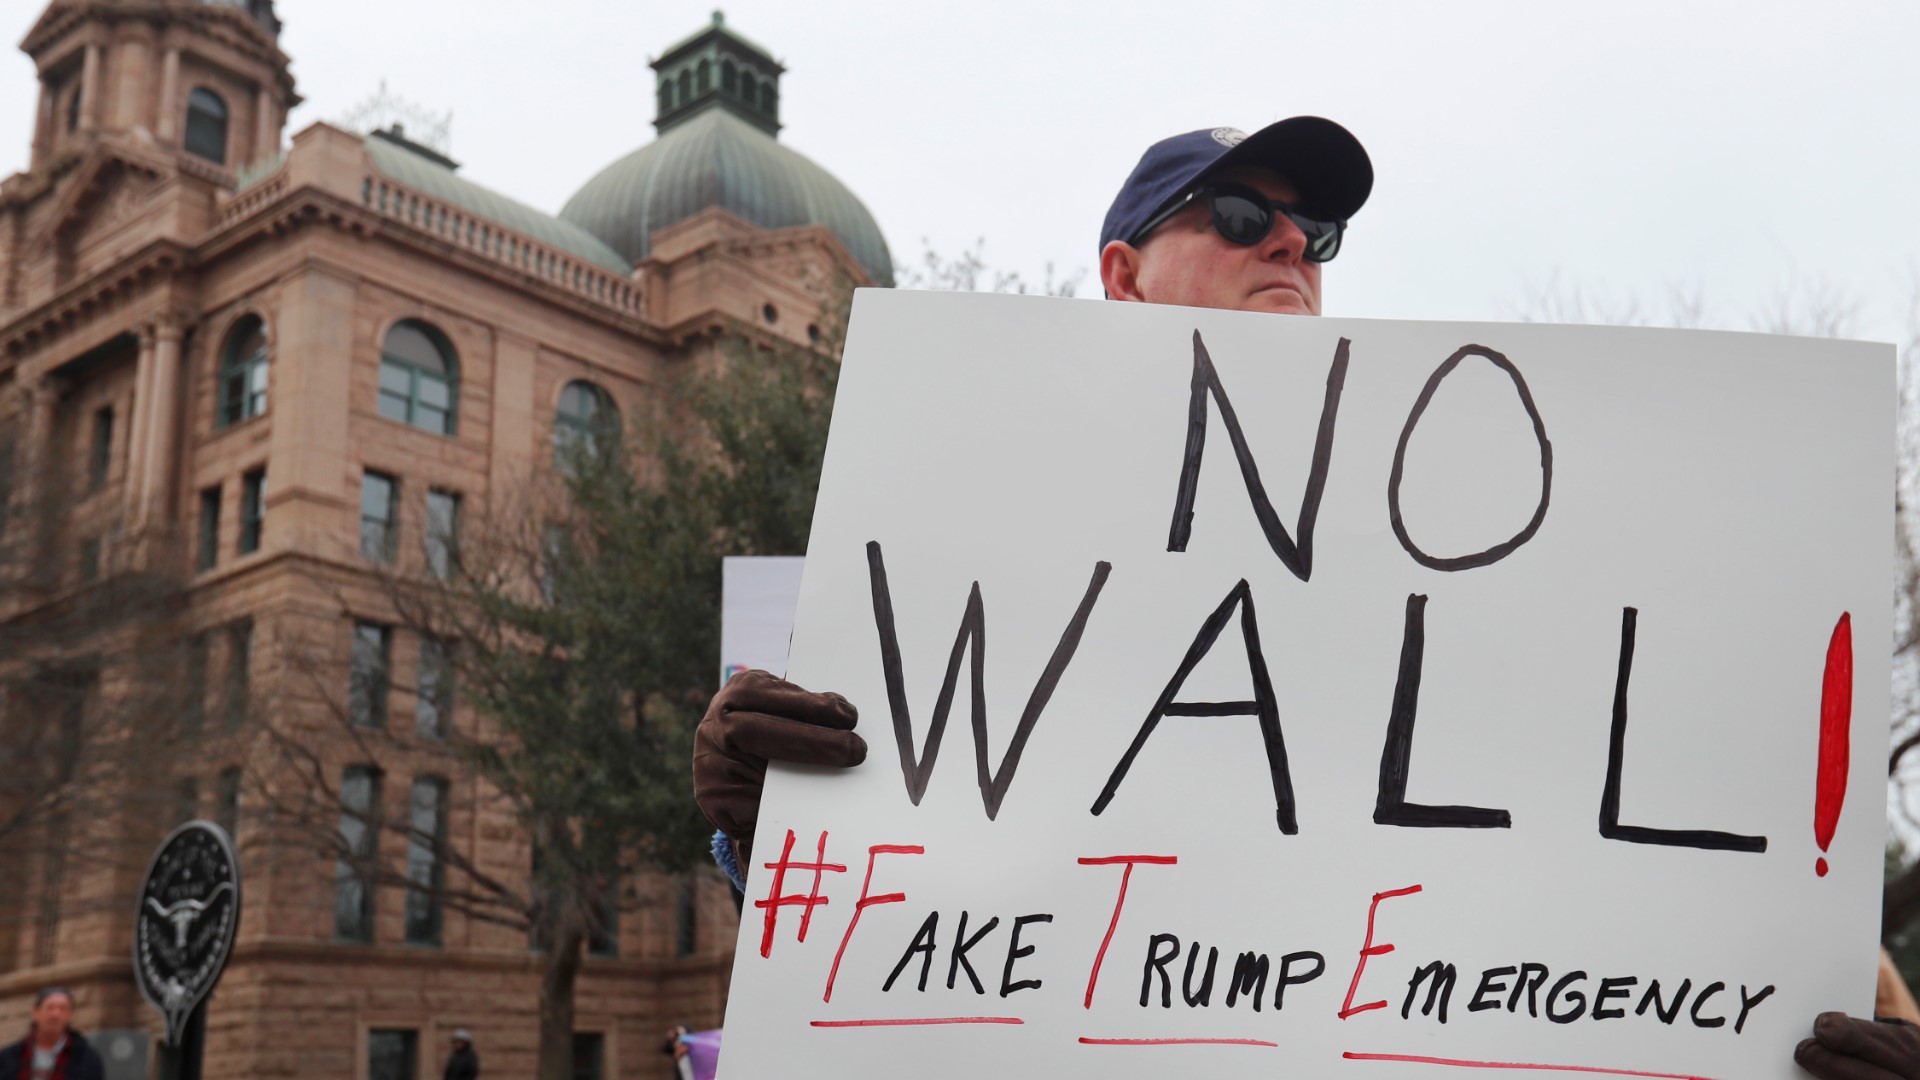 Local leaders, advocates and activists and joined together against Trump's "illegal fake emergency," as they referred to it in a press release.